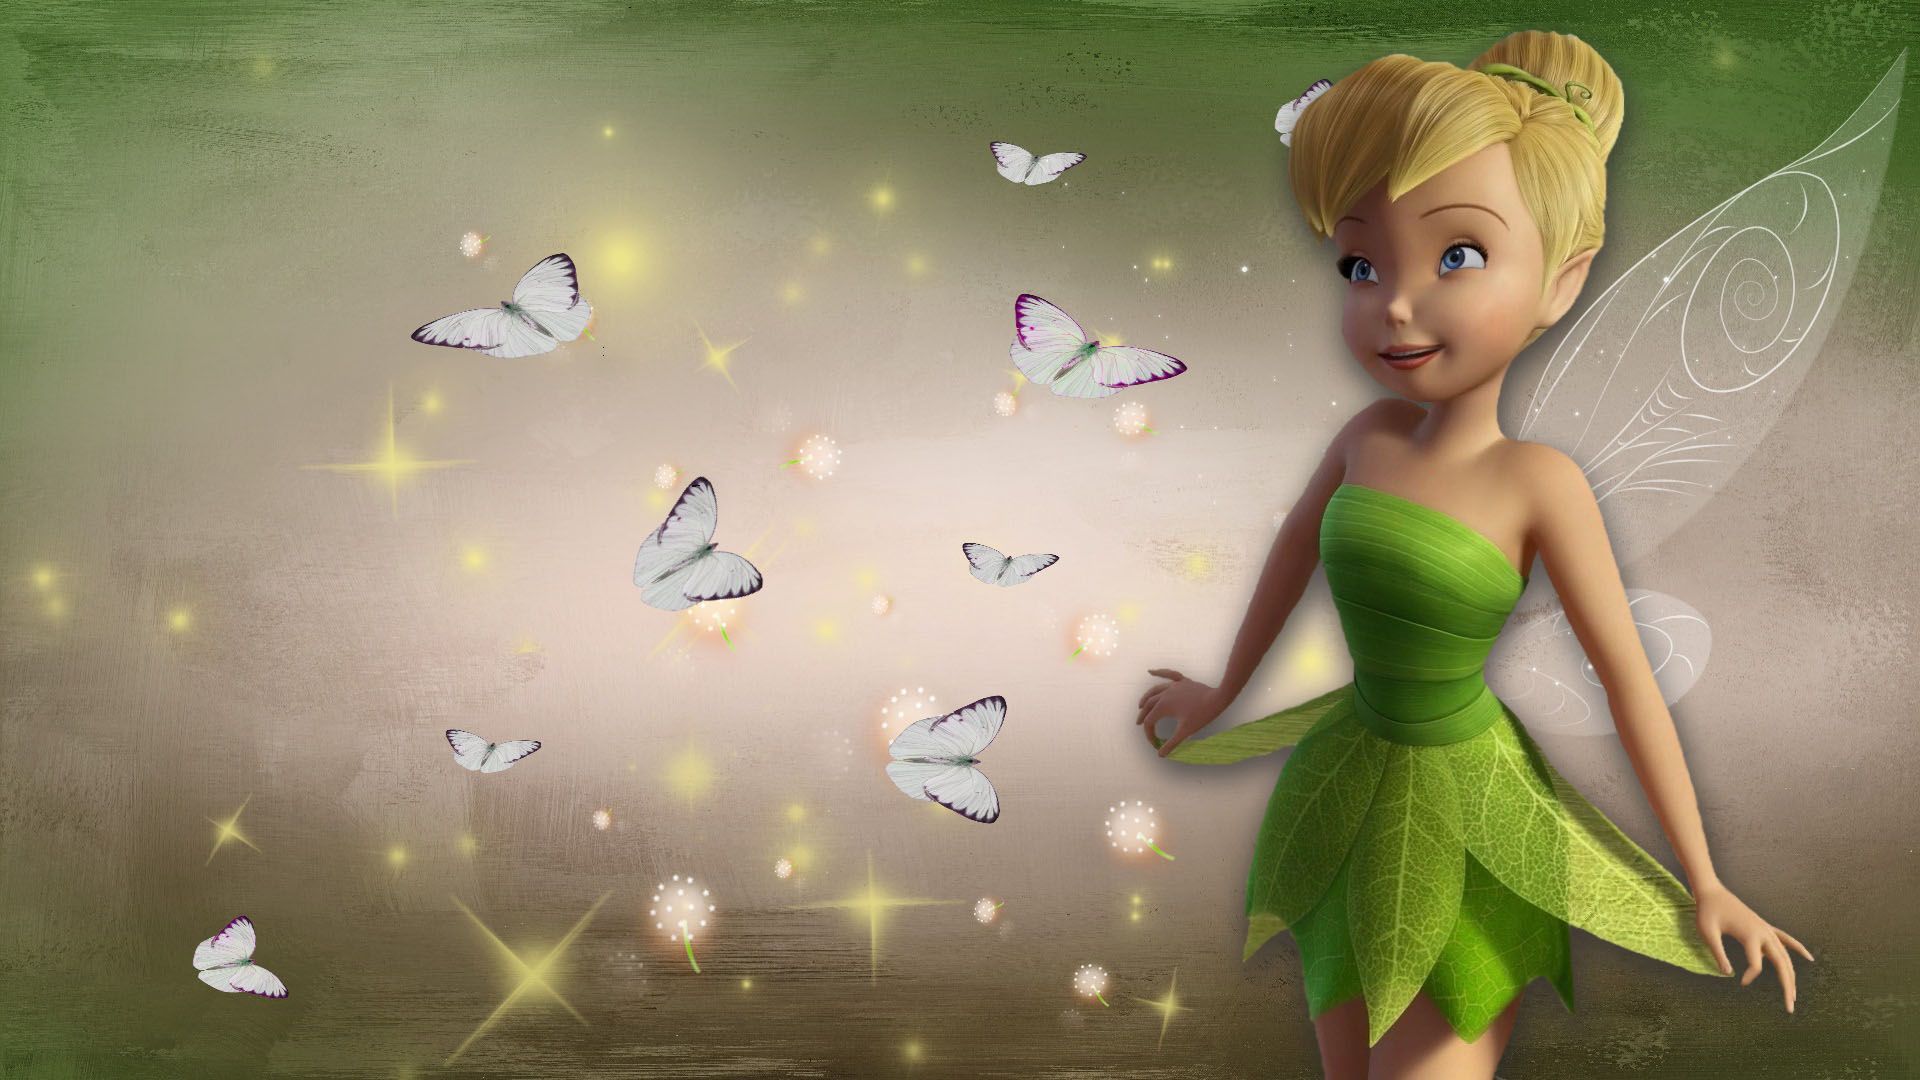 [49+] tinker bell wallpapers and screensaver on on tinkerbell wallpaper free